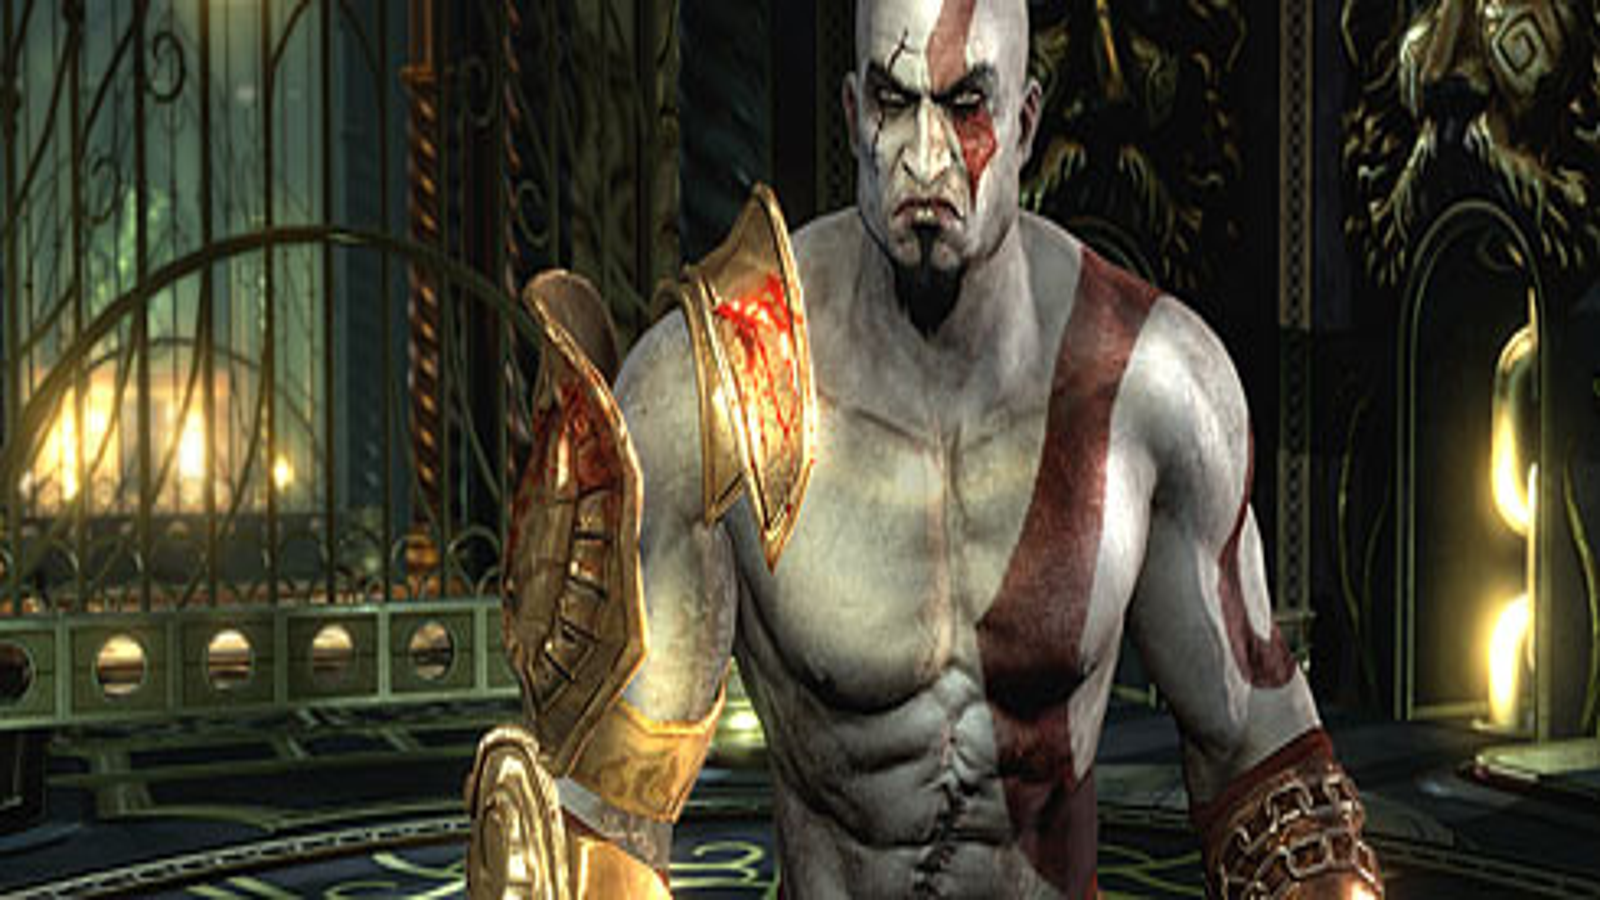 God of War III PS3 Unlockables and Achievements Guide